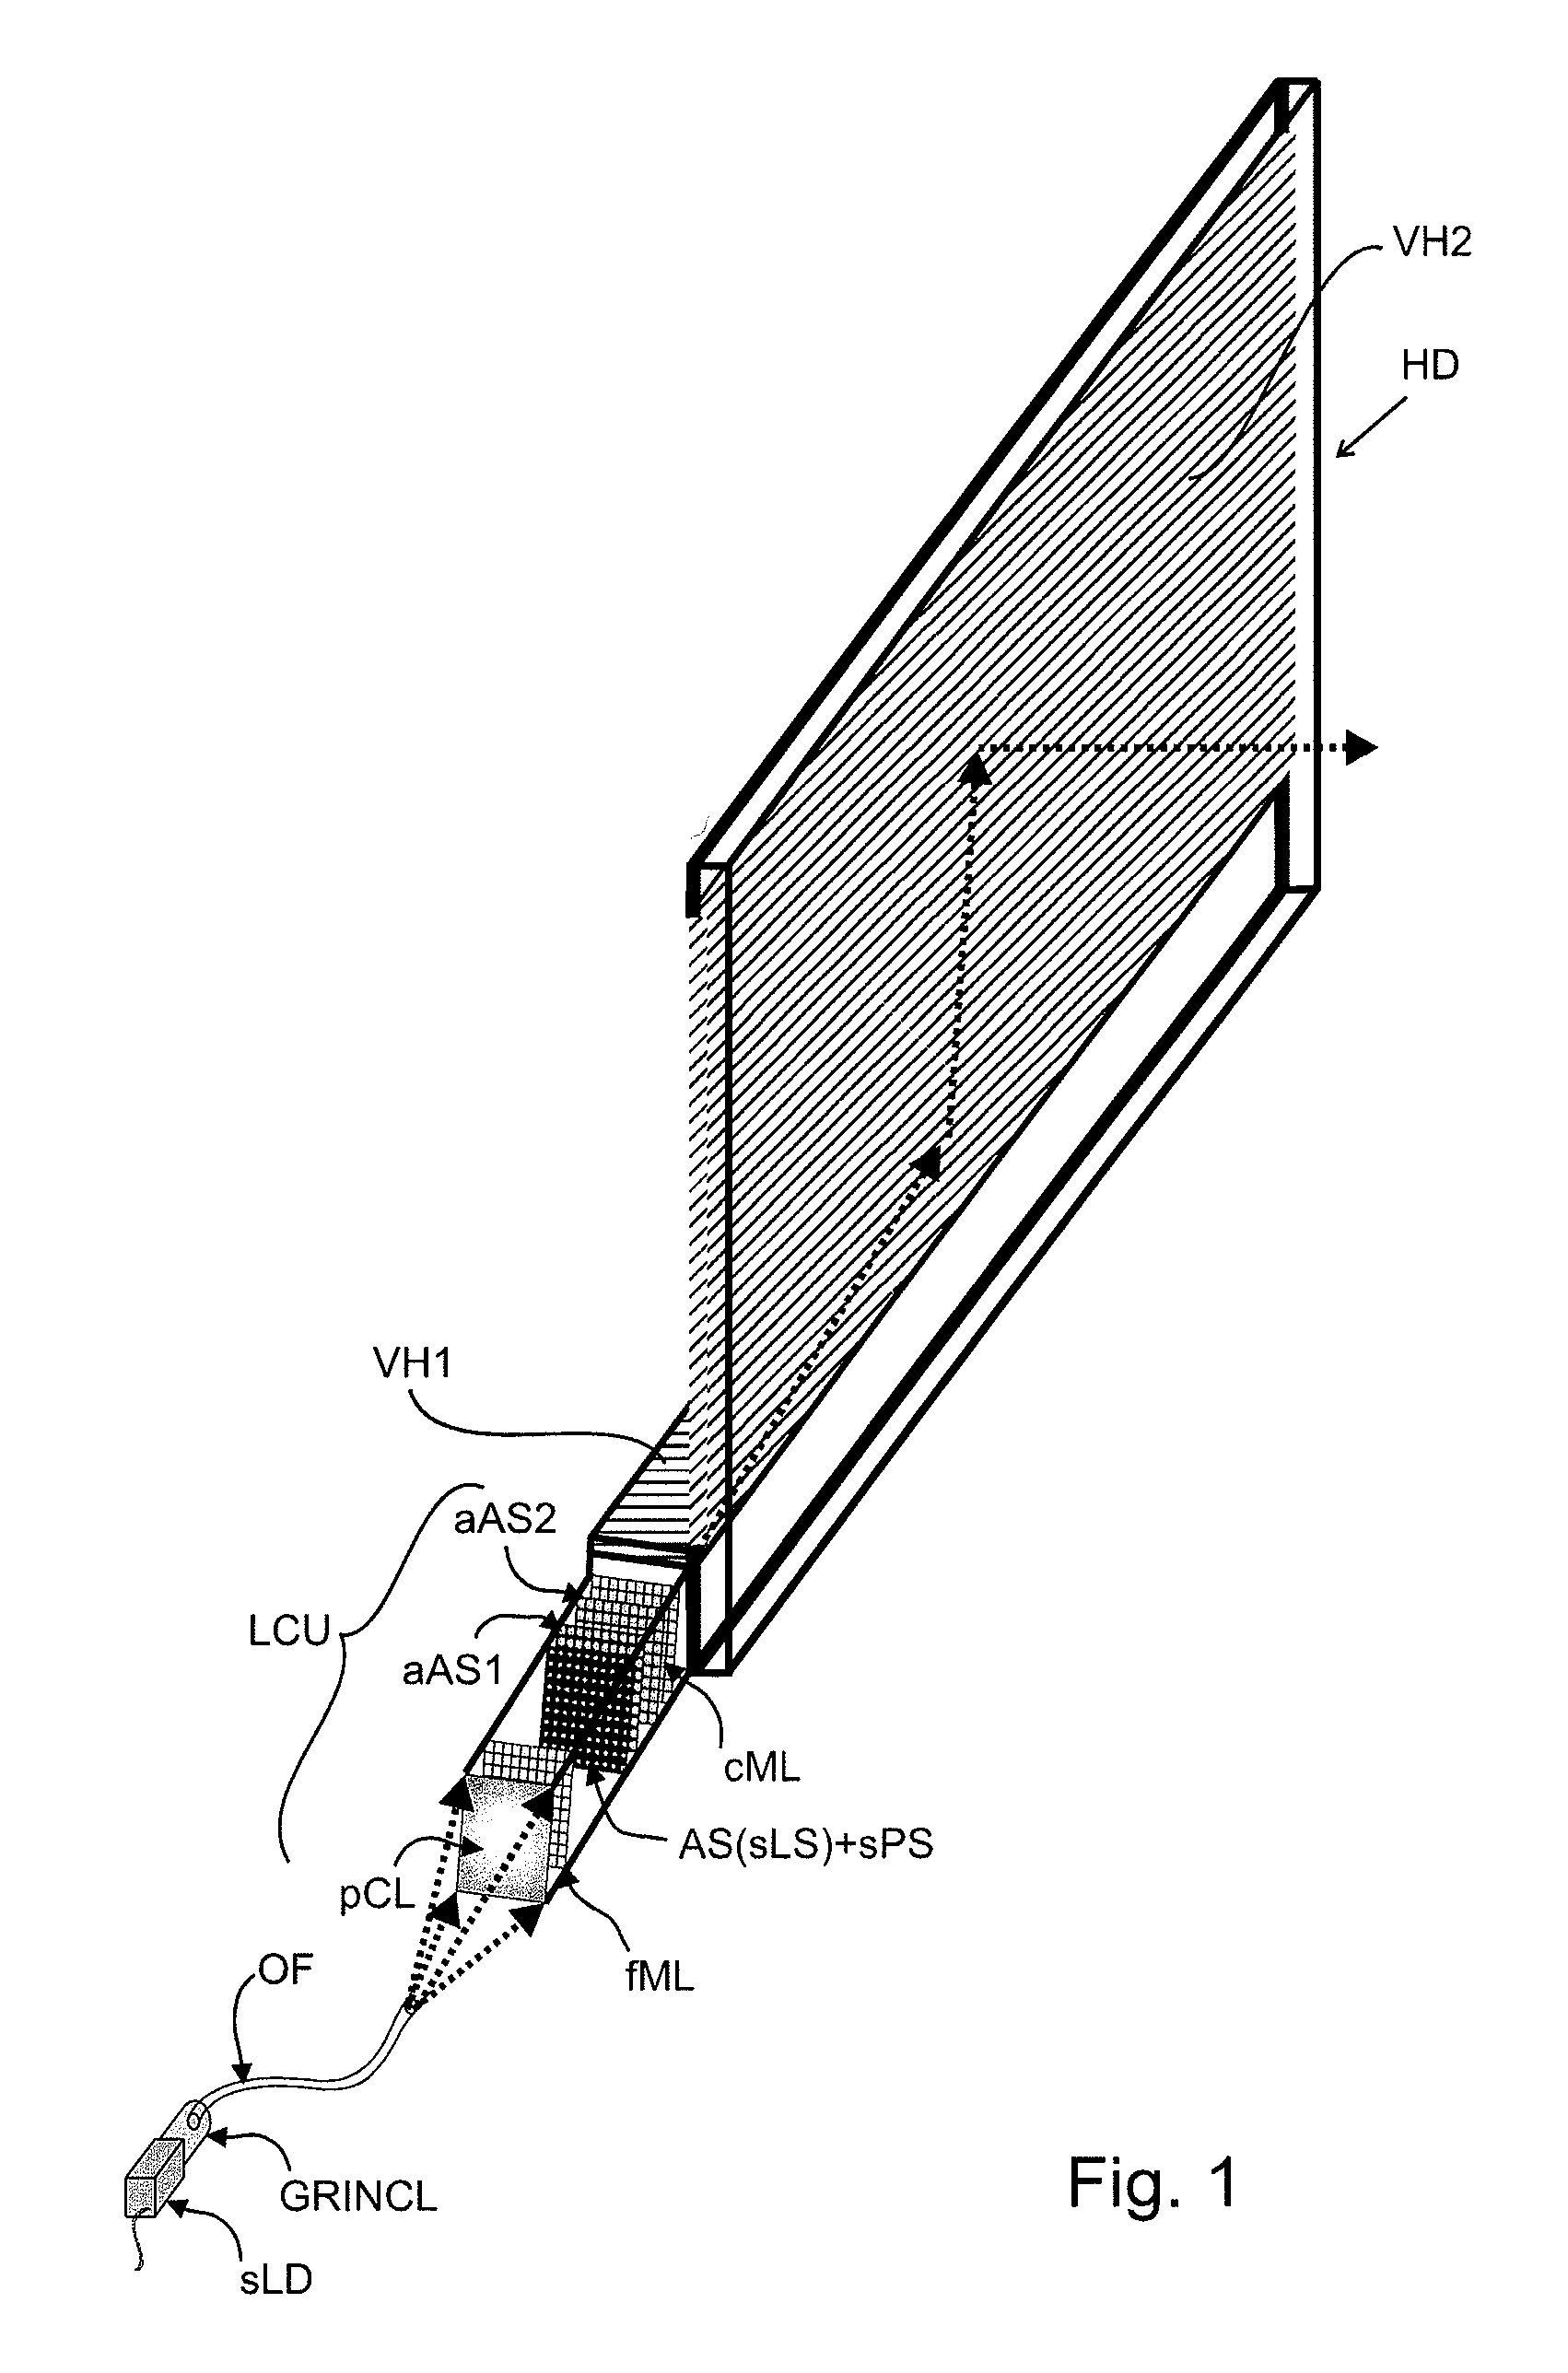 Beam divergence and various collimators for holographic or stereoscopic displays